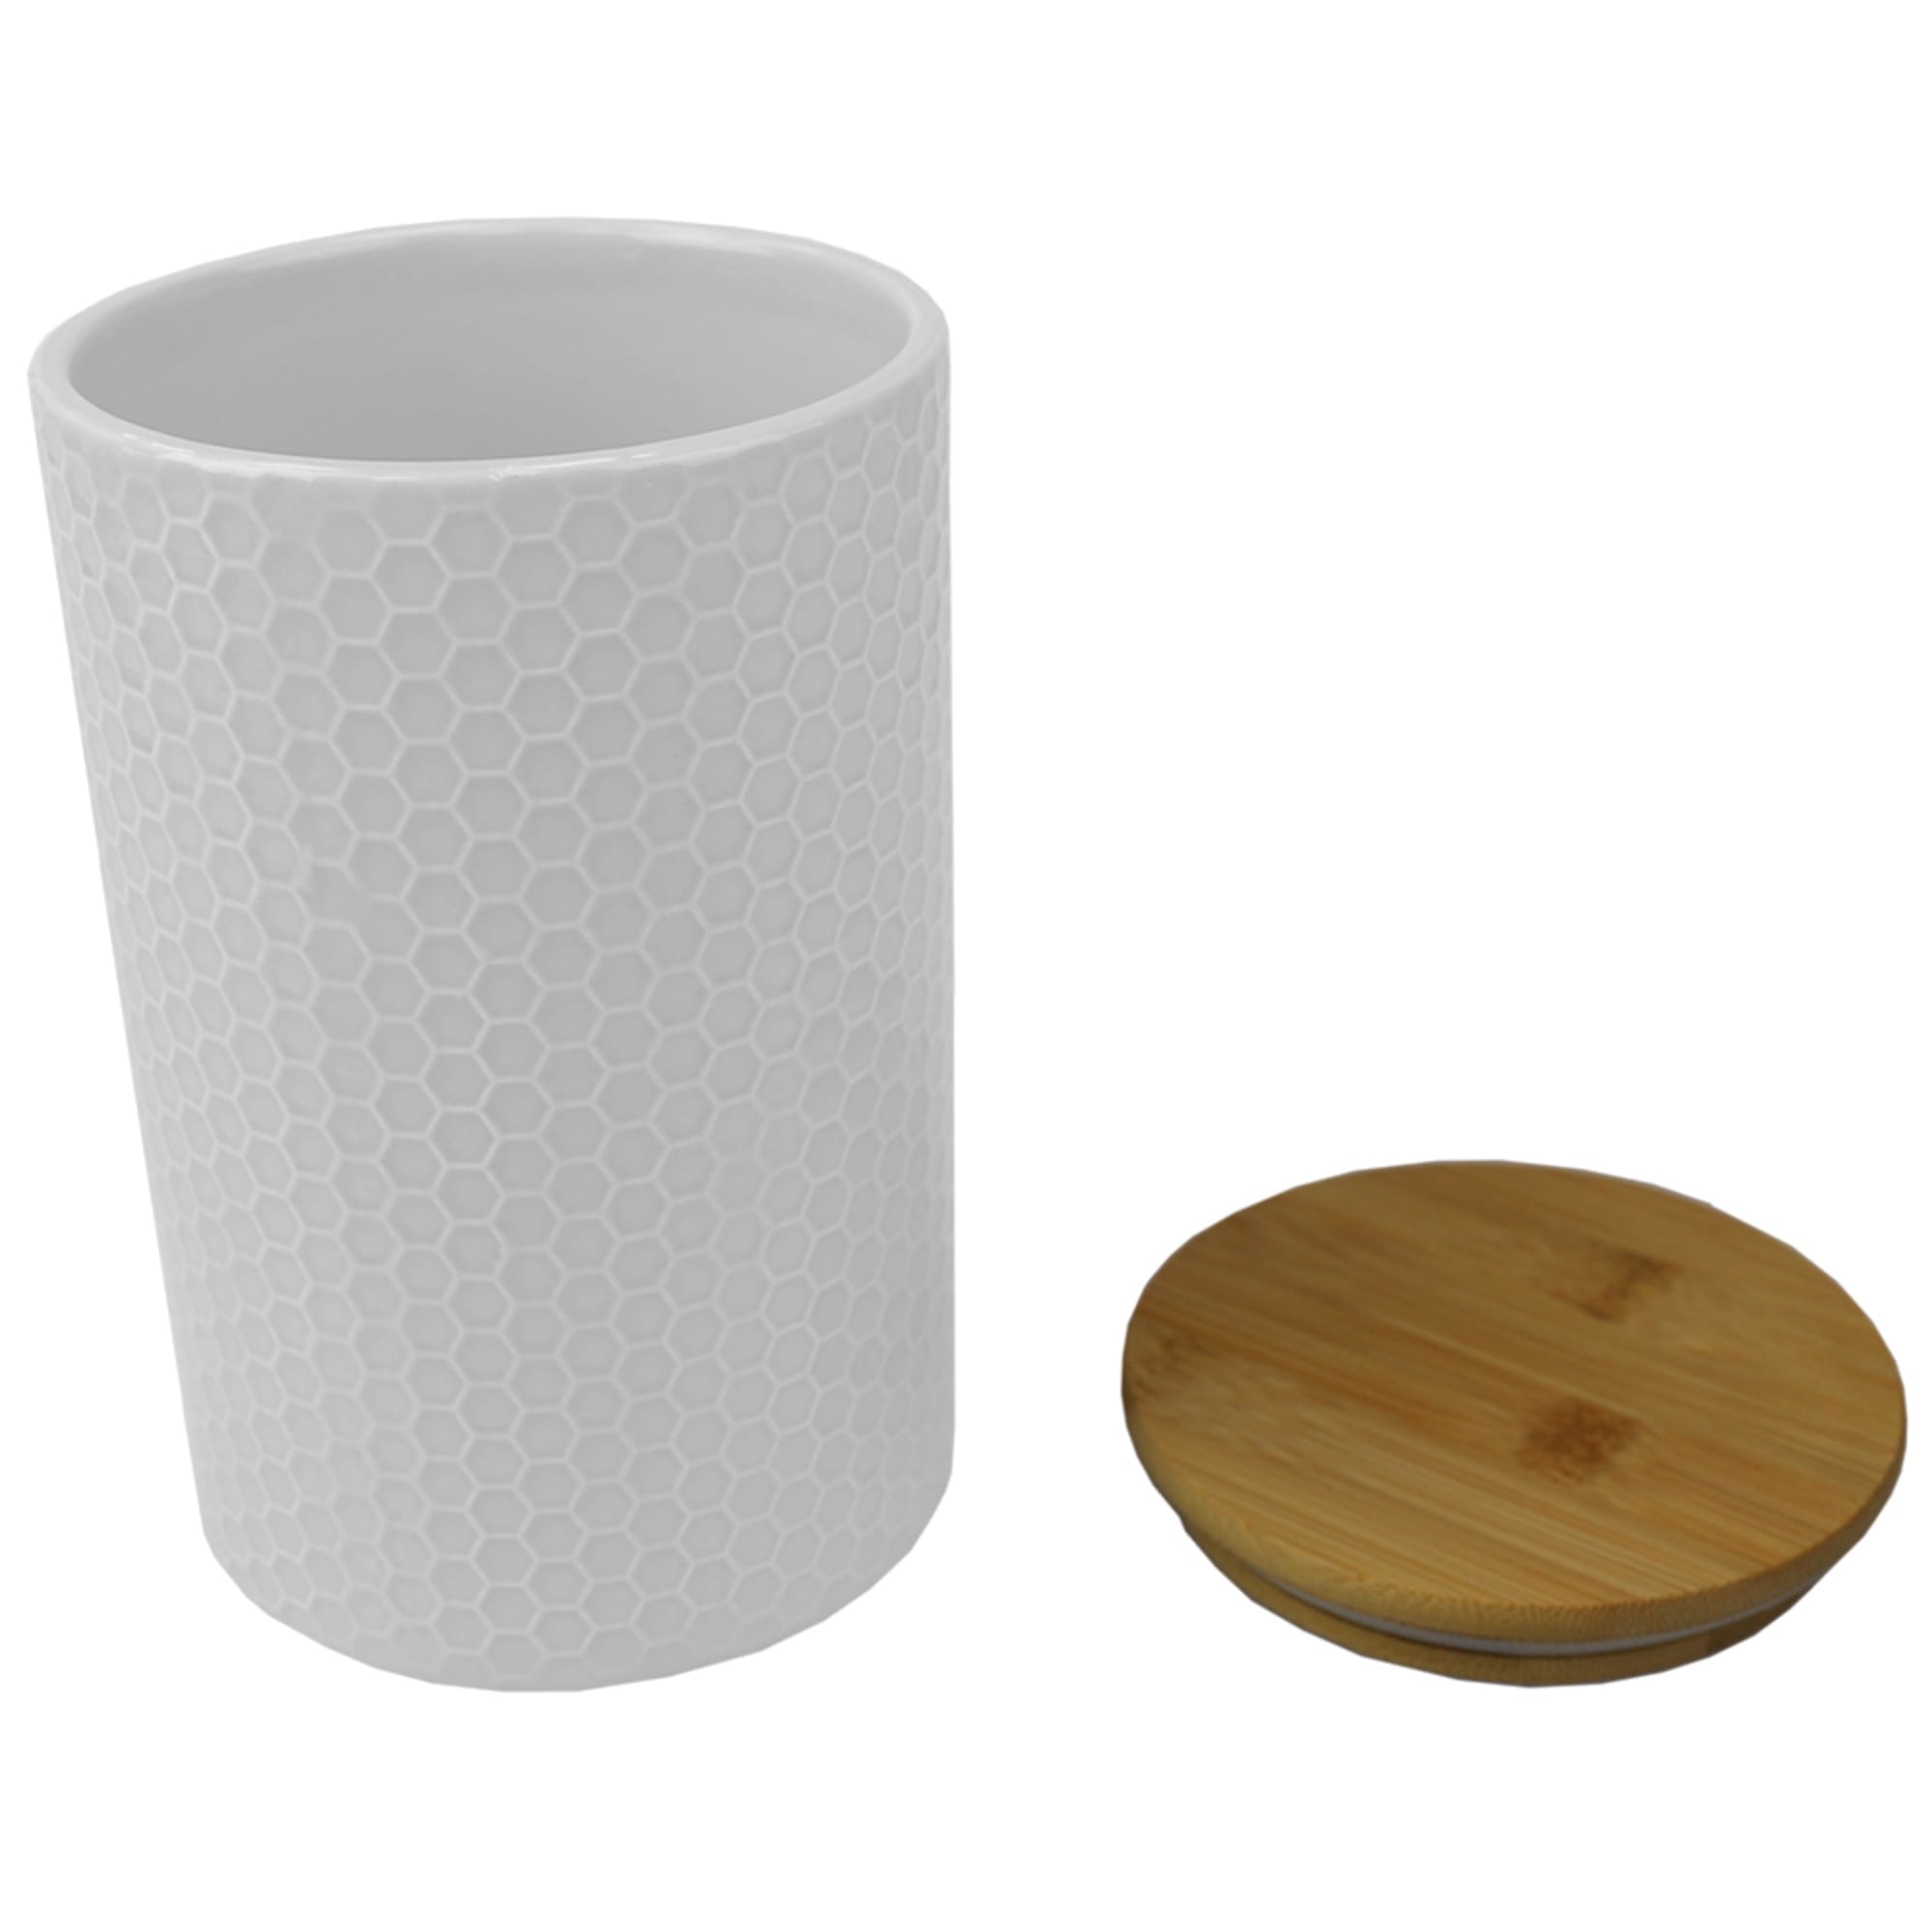 Home Basics Honeycomb Large  Ceramic Canister, White $7.00 EACH, CASE PACK OF 12